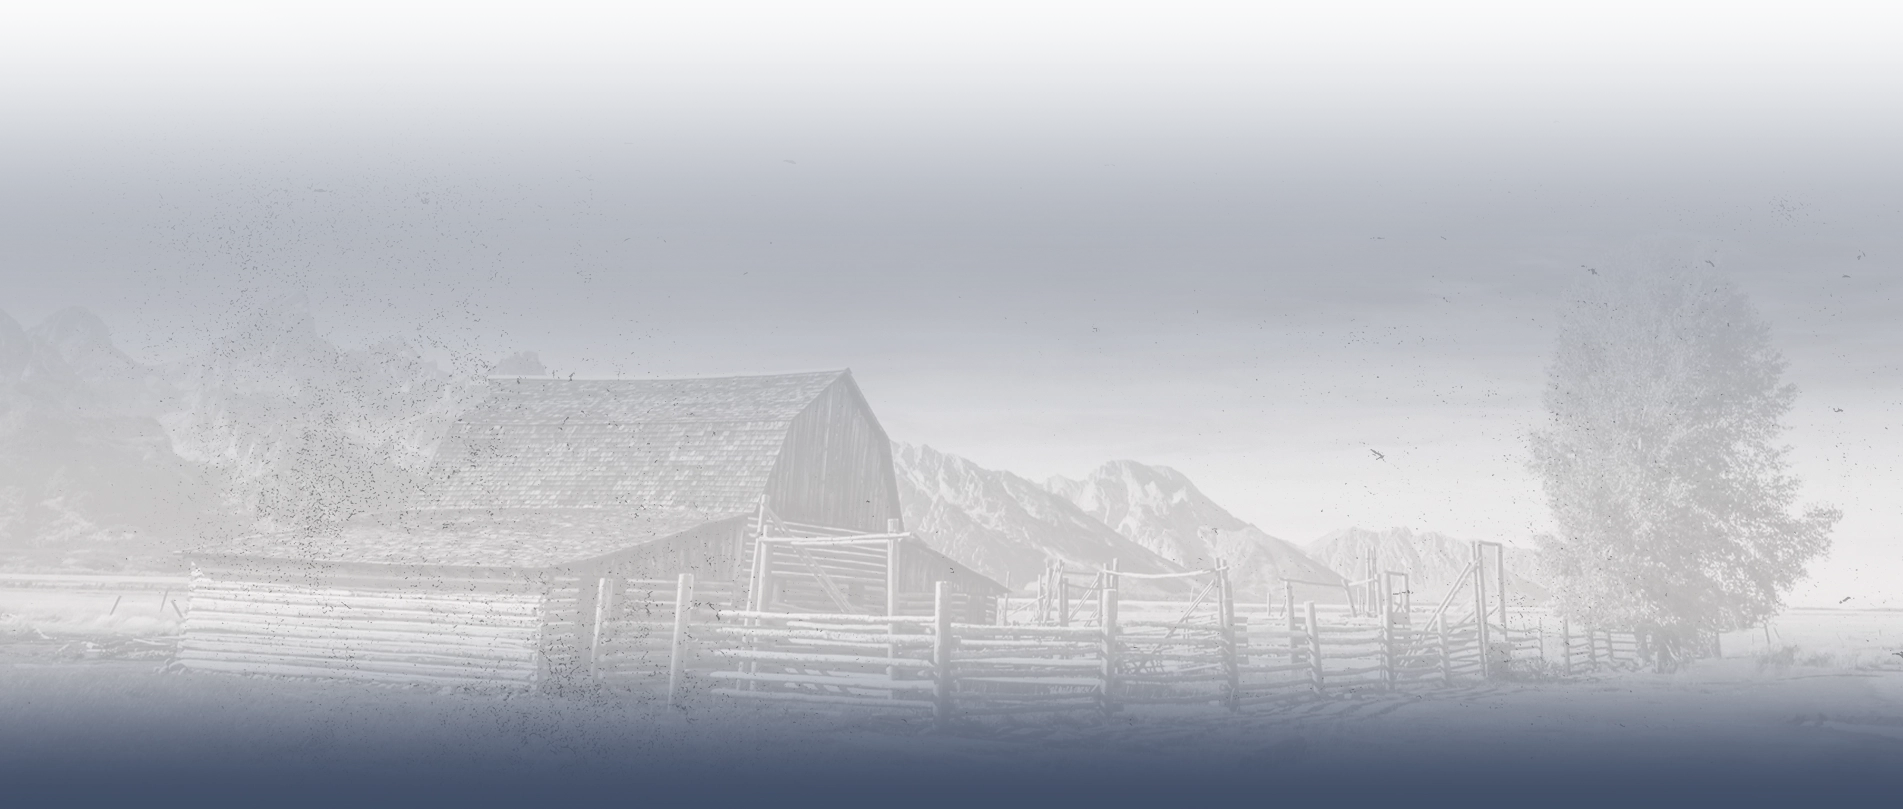 Landscape image of a antique barn with a fence around it and a free out front, with picturesque mountains in the background. There is a white and grey overlay to the image.